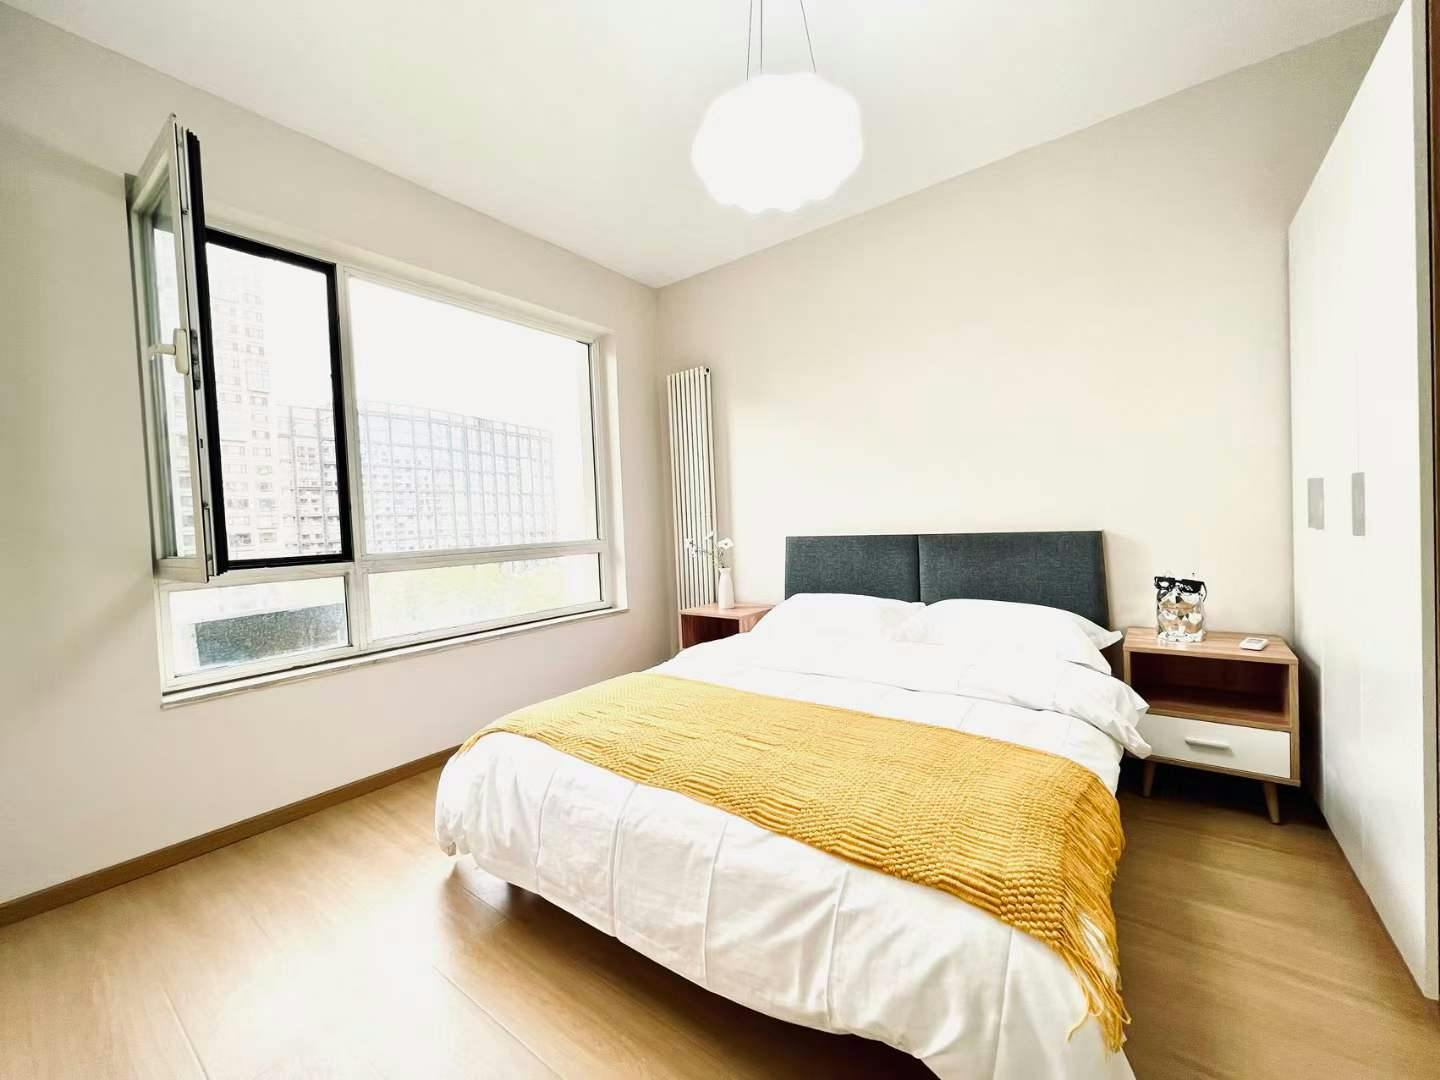 Guomao/Shuangjing, 10/7 pingod community two bedrooms, 6minutes to subway